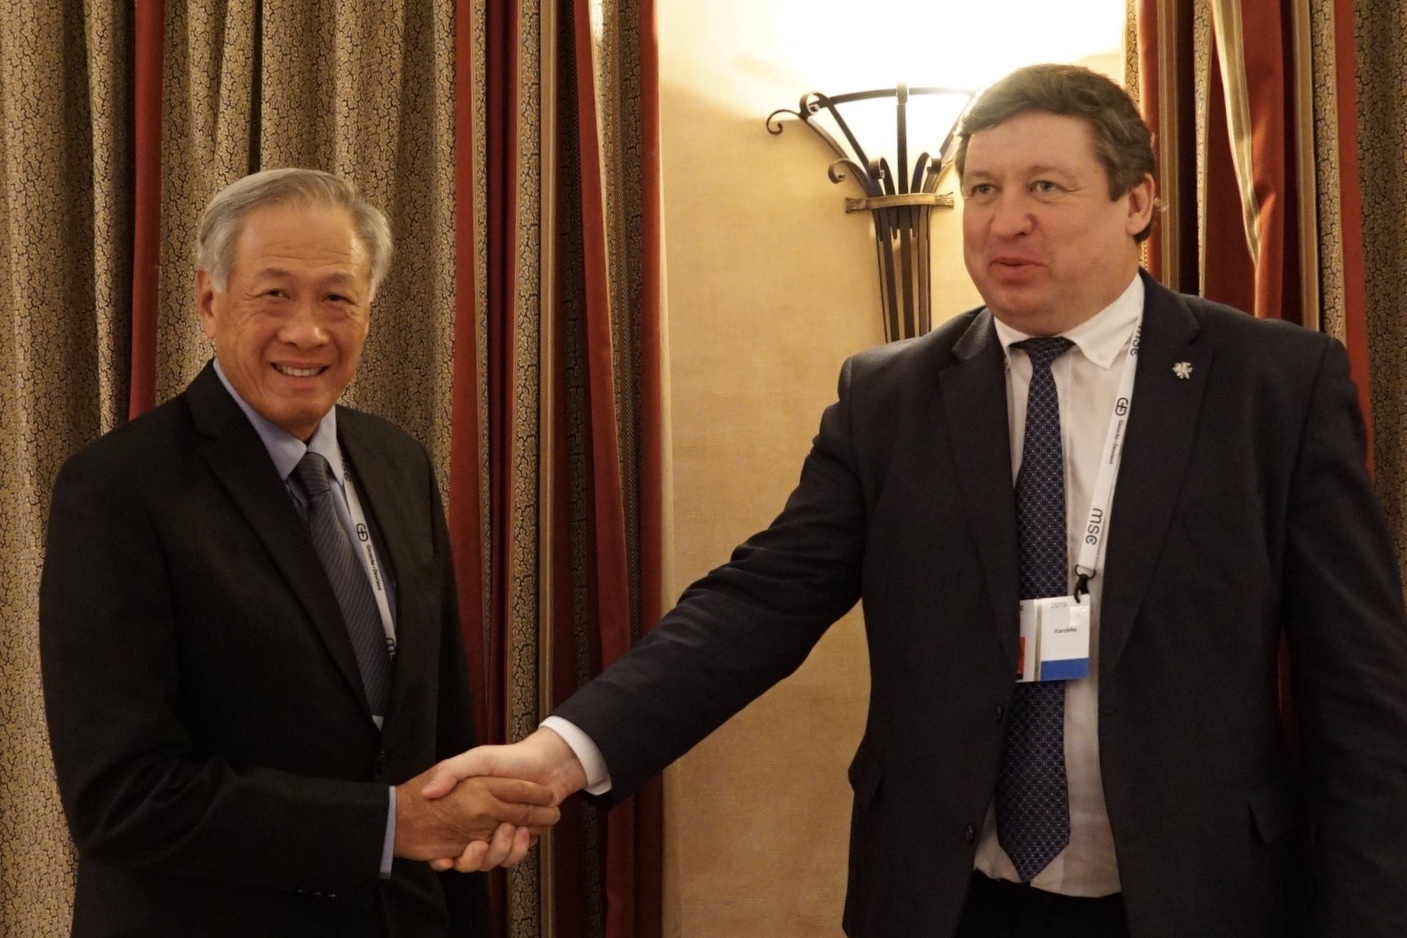 Dr Ng (left) with the Lithuania Minister of National Defence Raimundas Karoblis (right) on the sidelines of the 55th Munich Security Conference.